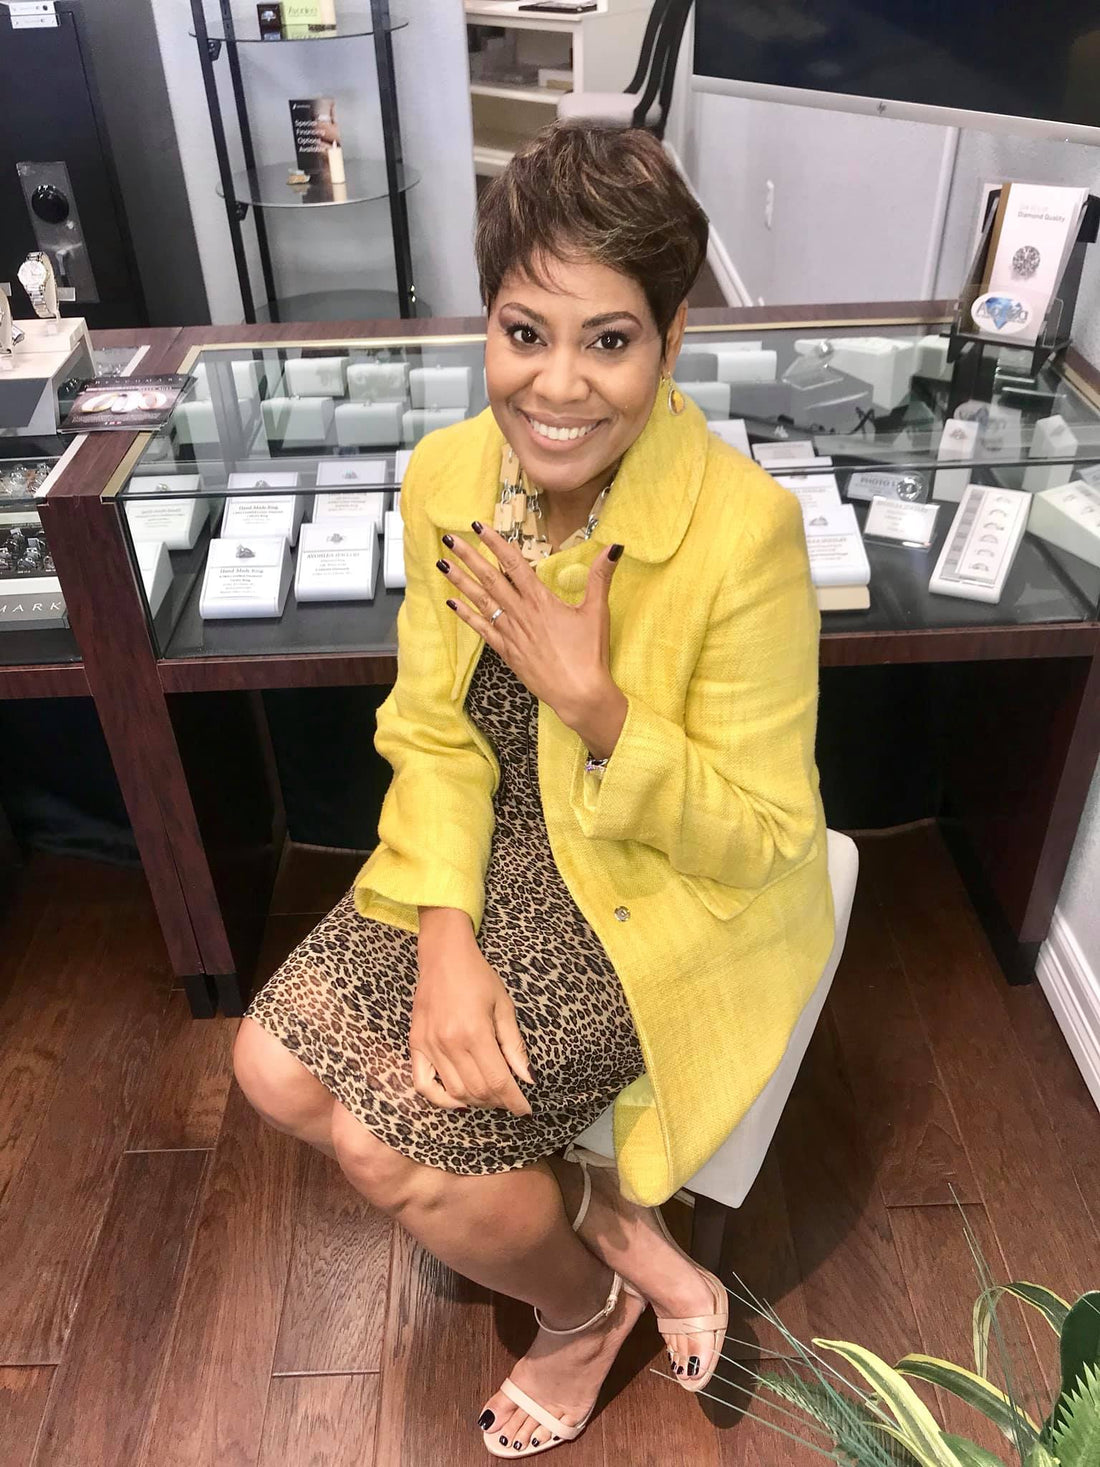 Jackie Simien joined us at Avonlea Jewelry in Lumberton